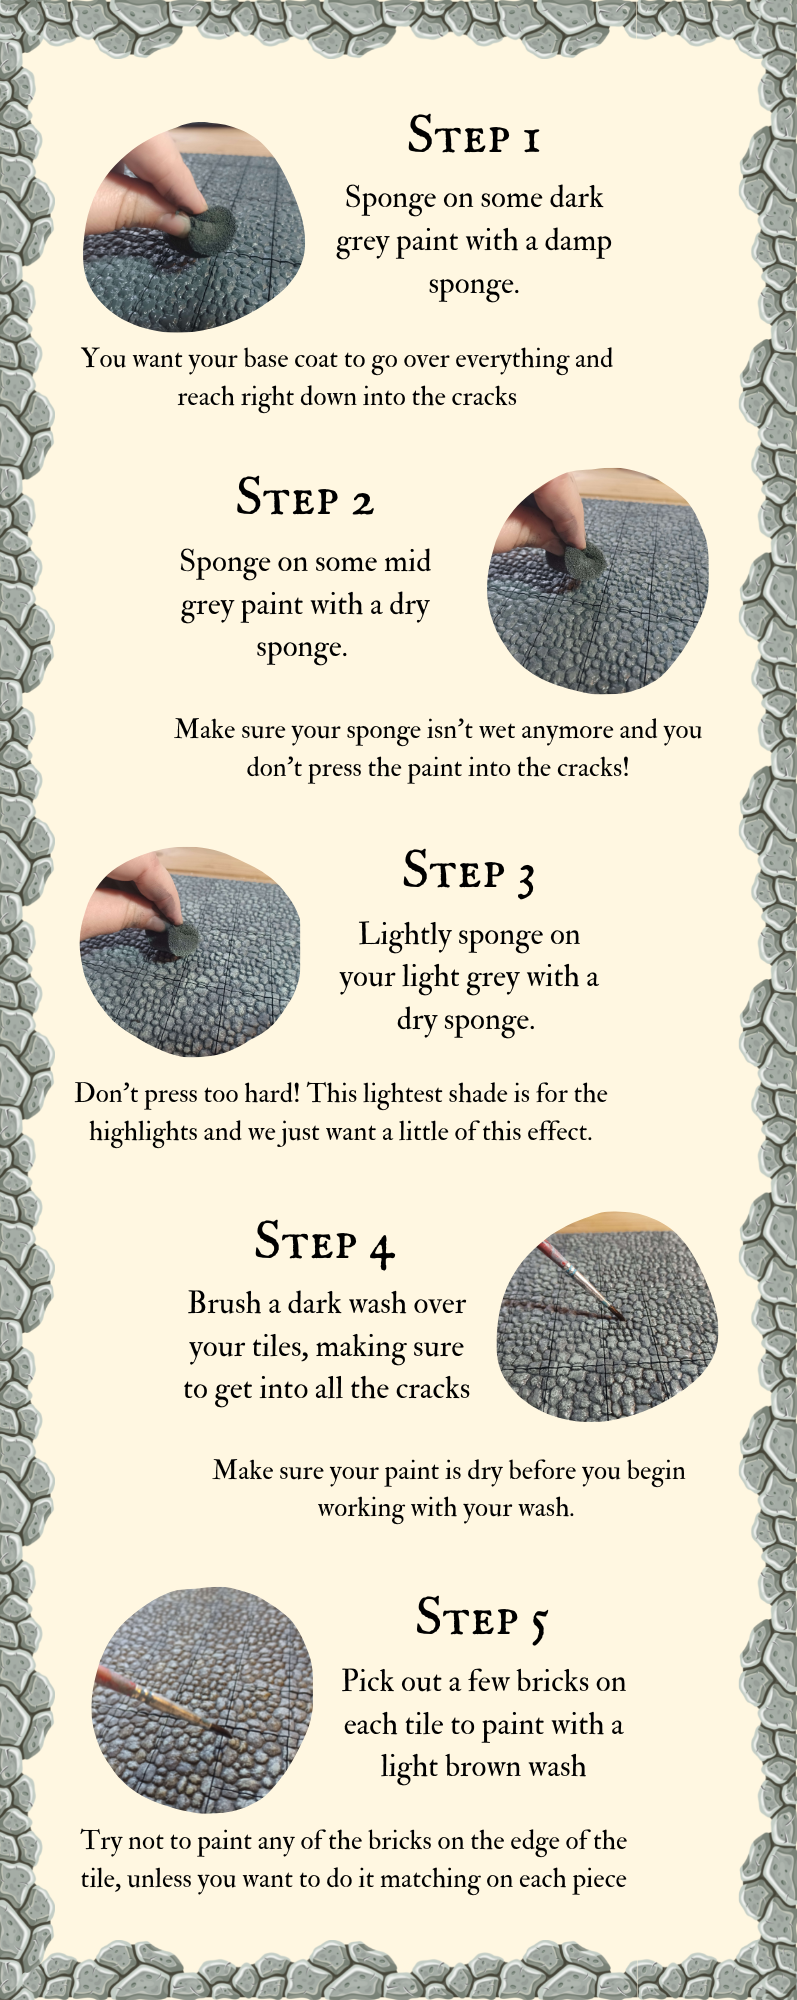 How to paint dungeon tiles, painting terrain in cobblestone effect